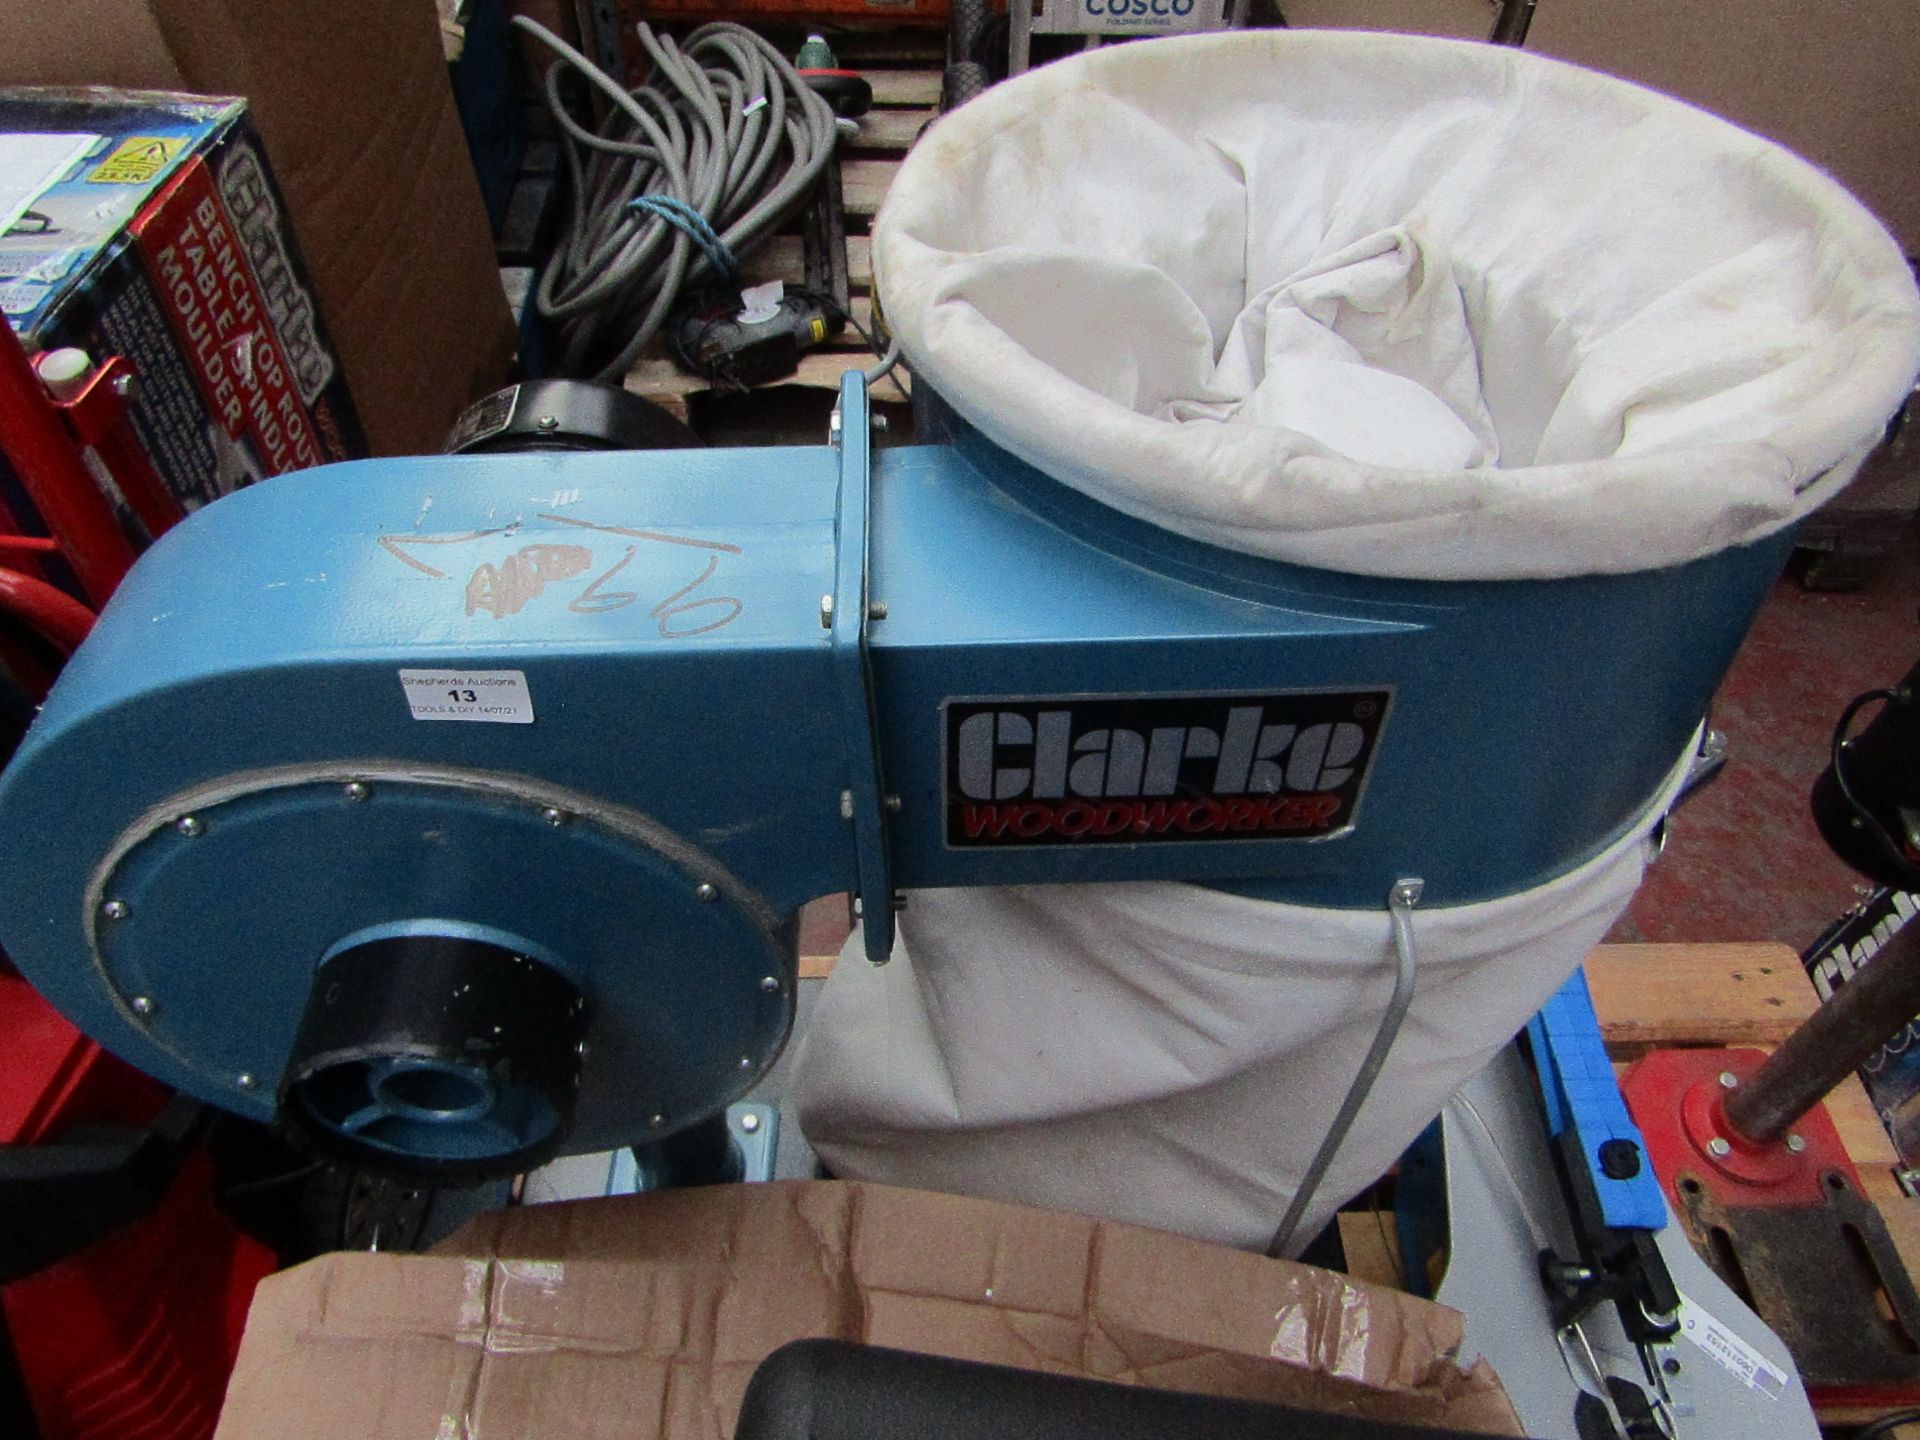 1x CL DUST CDE7B 230V 7 997 This lot is a Machine Mart product which is raw and completely unchecked